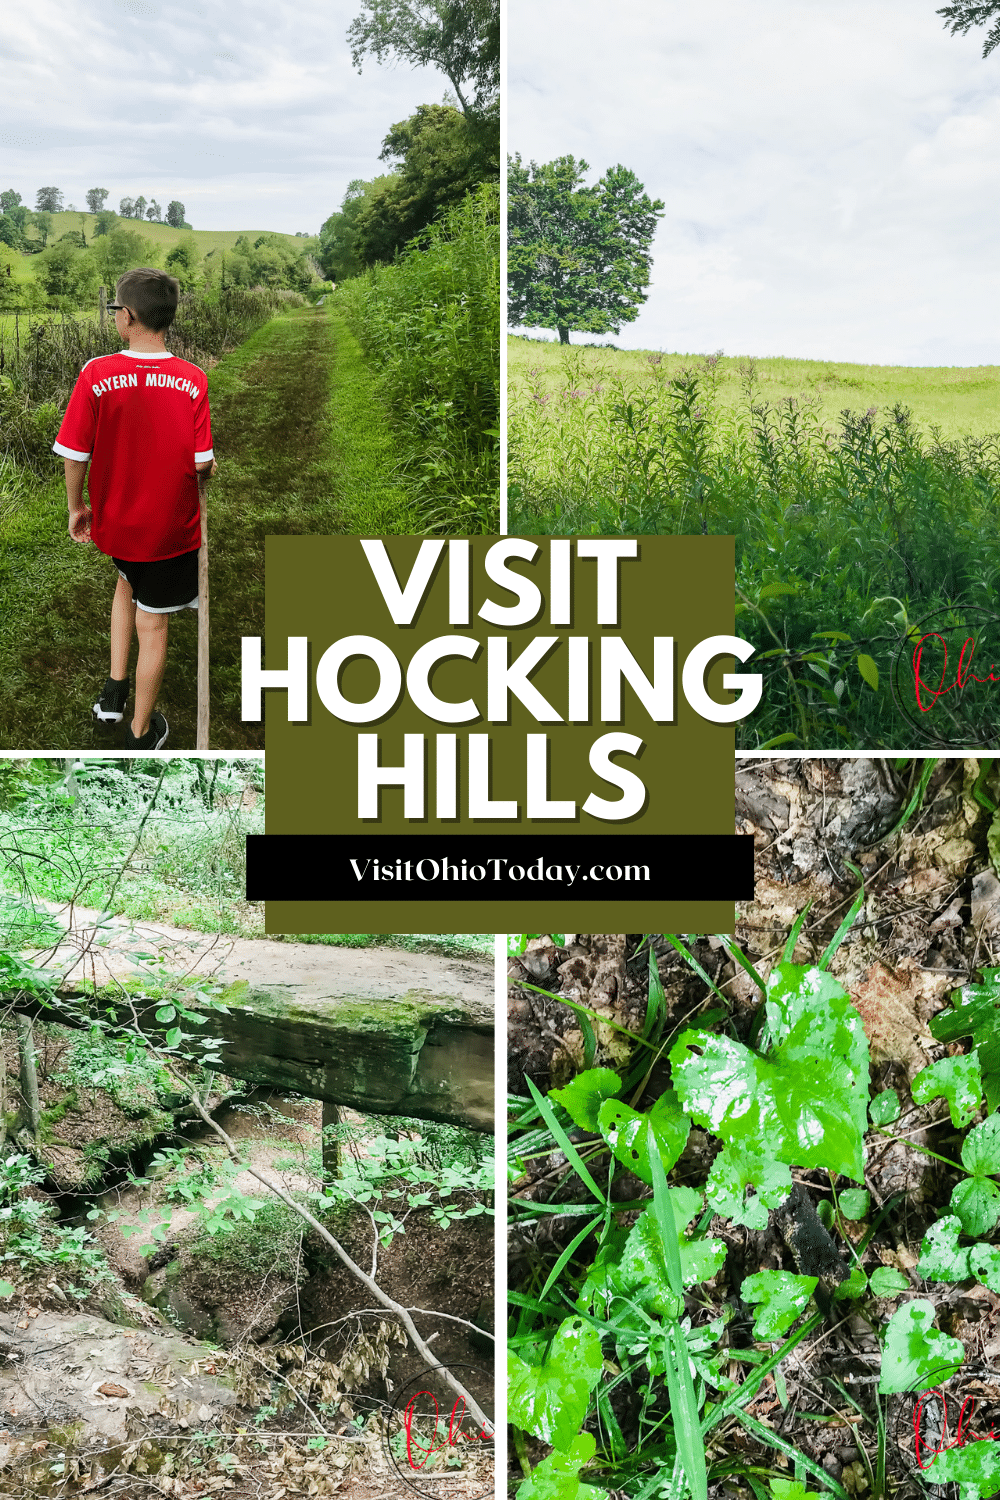 Rock Bridge State Park is a beautiful easy to moderate hiking trail to a natural bridge way, located in the Hocking Hills area. #hockinghills #Ohio